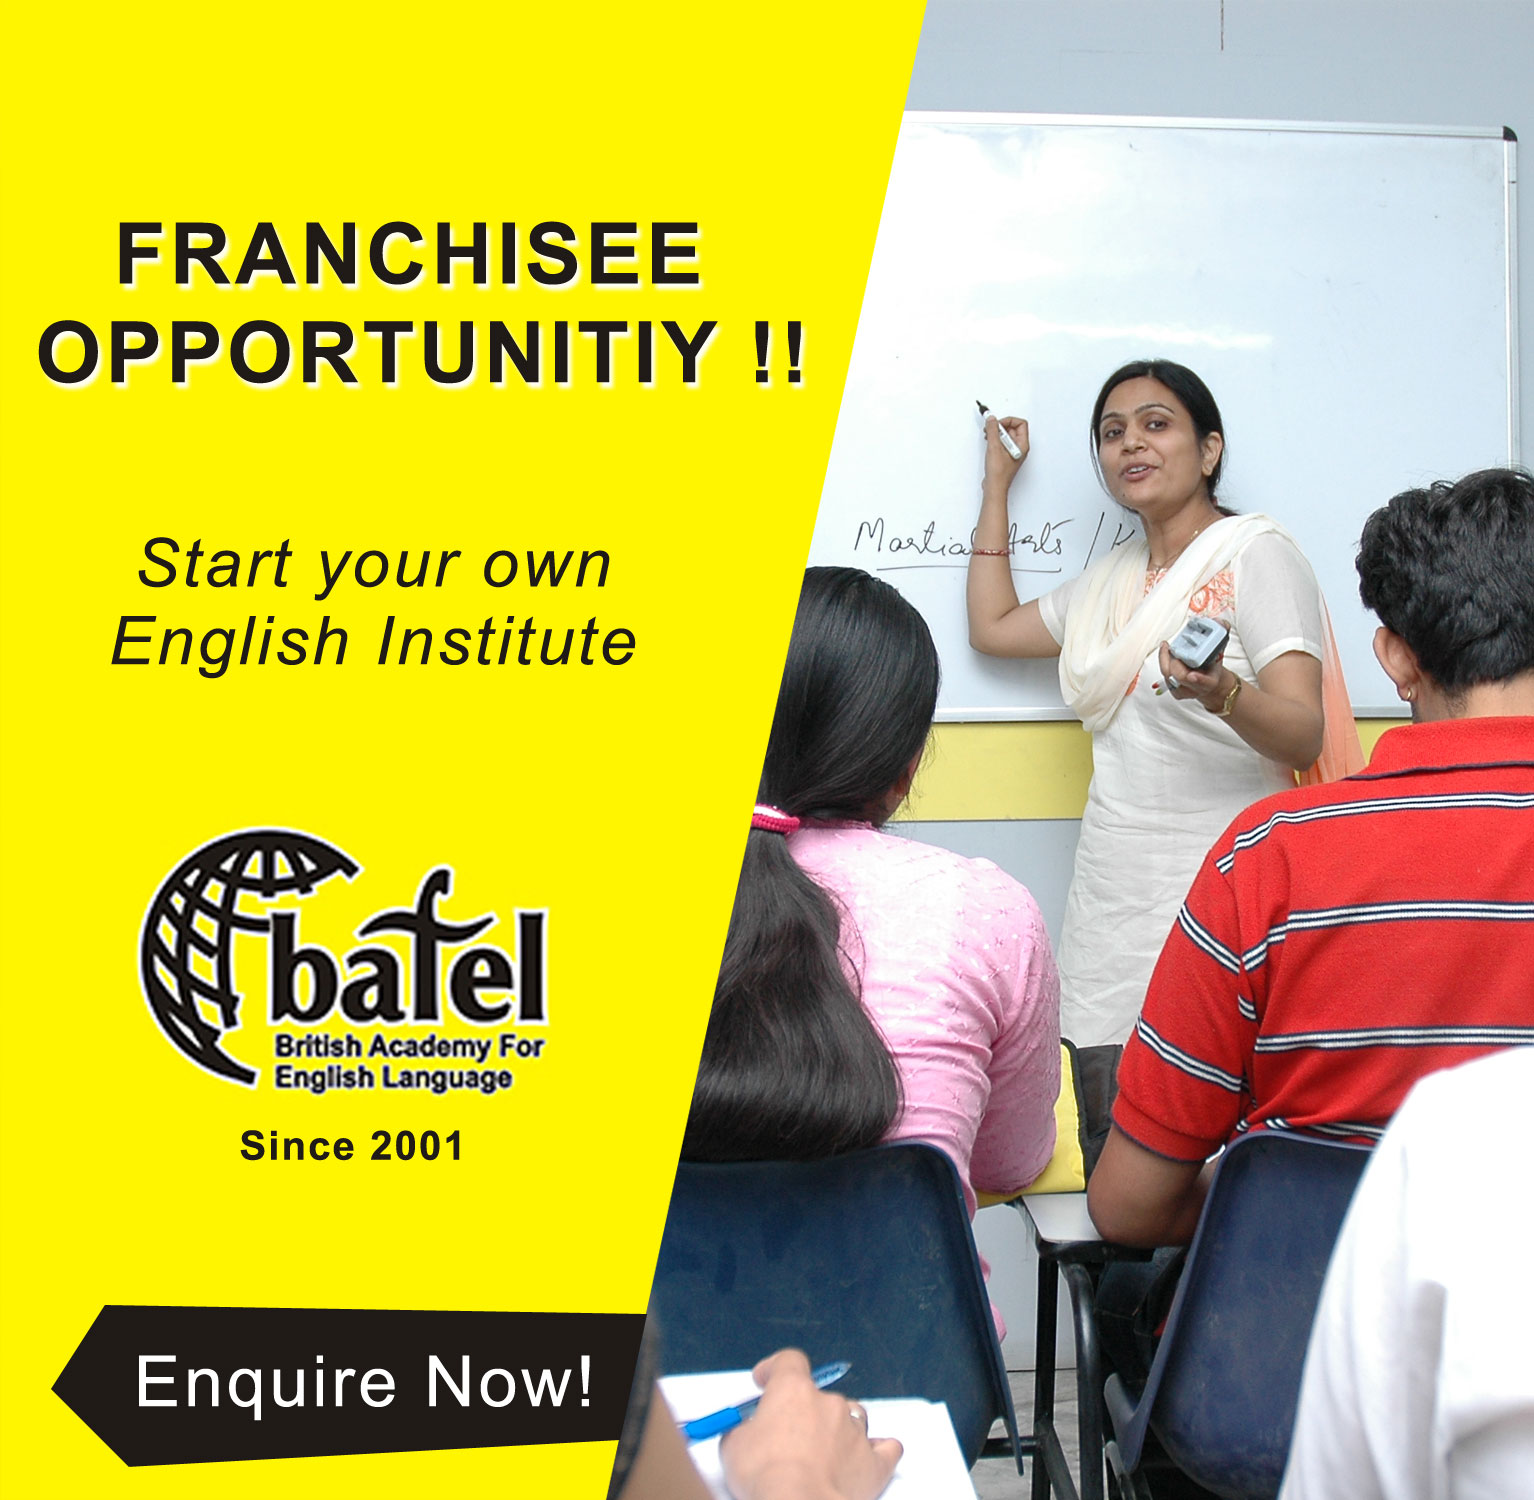 Franchise Opportunities in India